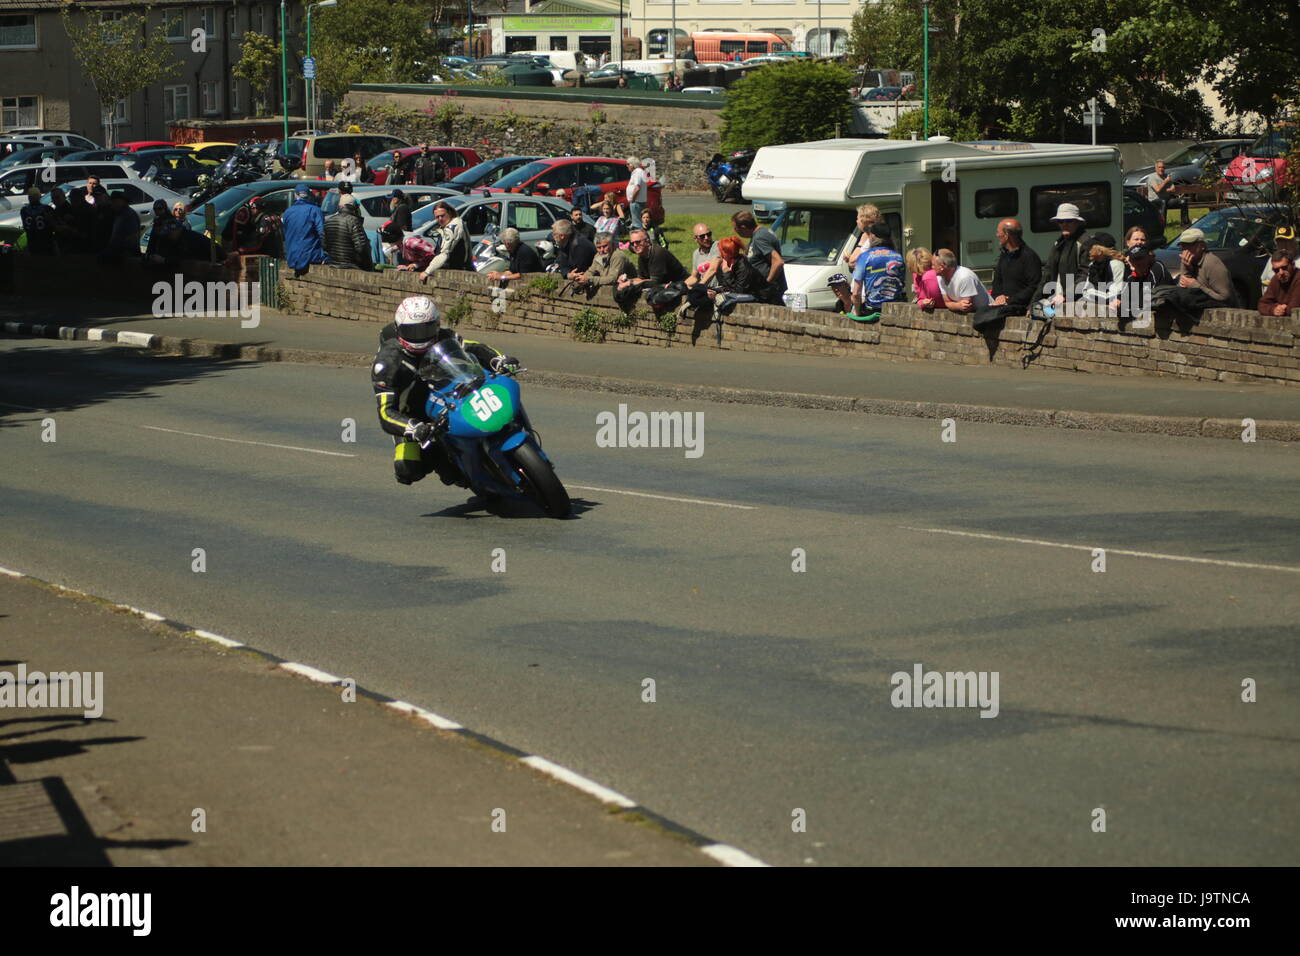 Isle of Man TT Races, Sidecar, Supersport/Lightweight/Newcomers (all classes) Qualifying Session and Practice Race. Saturday, 3 June 2017. Number Forest Dunn on his lightweight Kawasaki of the Forest Dunn Racing Team. Credit: Eclectic Art and Photography/Alamy Live News. Stock Photo